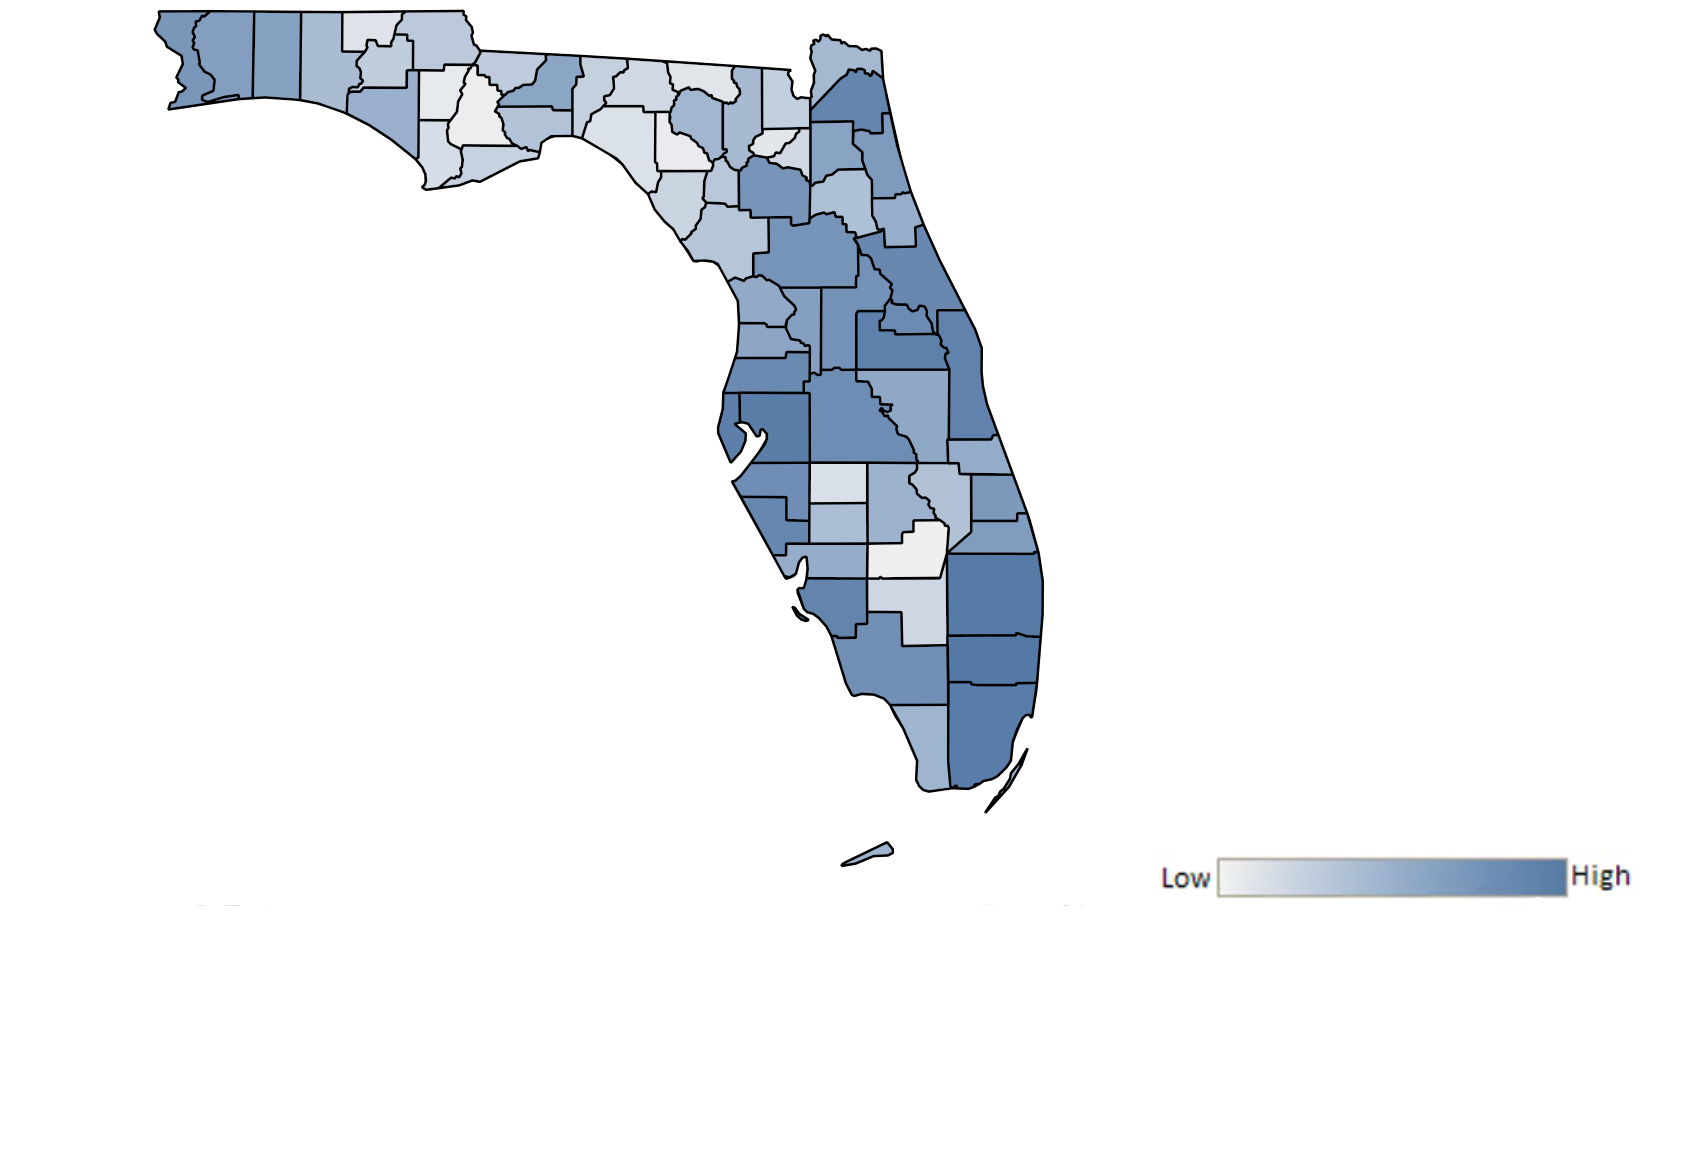 Map of Florida counties indicating relative number of complaints from low to high. See attached CSV file for complaint data by jurisdiction.